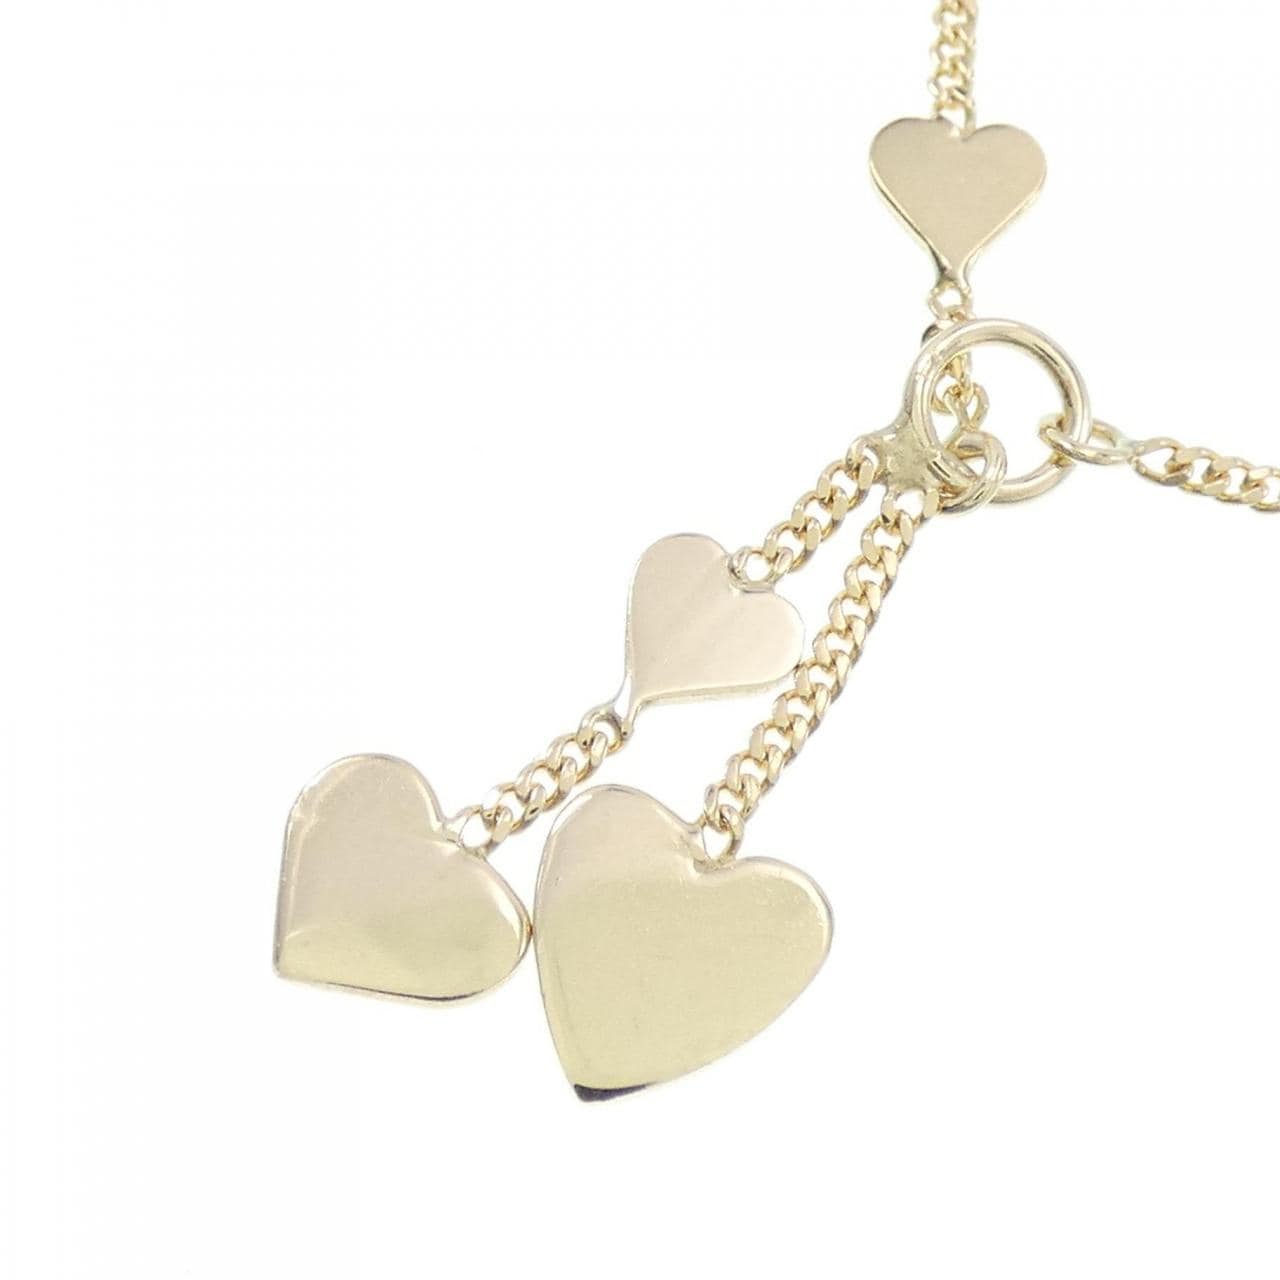 750YG heart necklace